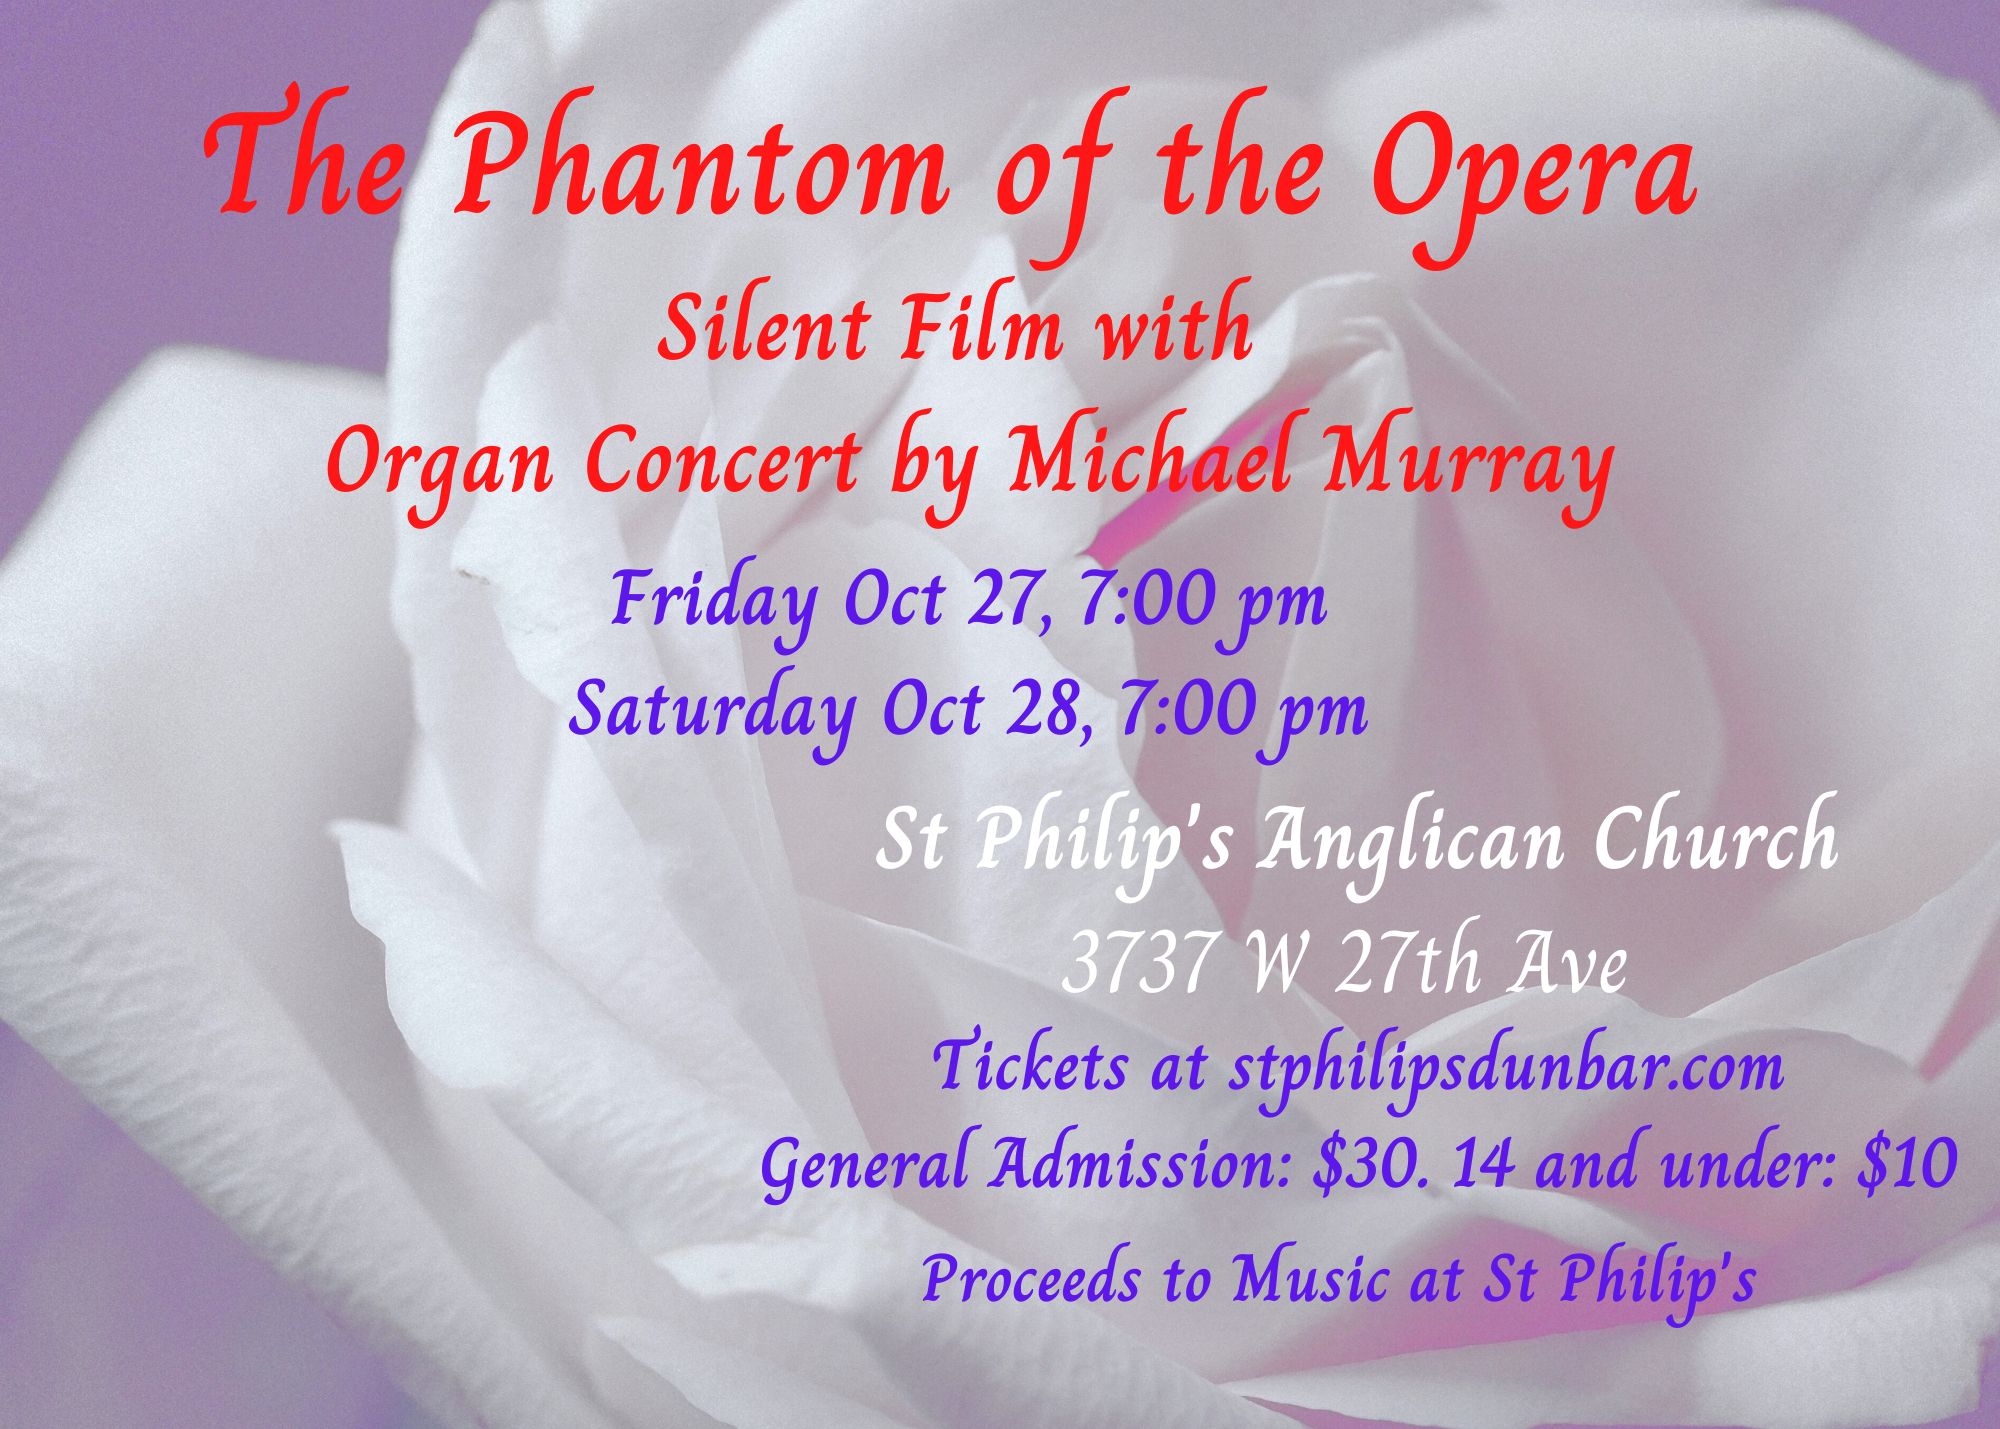 The Phantom of the Opera, Silent Movie with Organ Concert @ St. Philip's Anglican Church